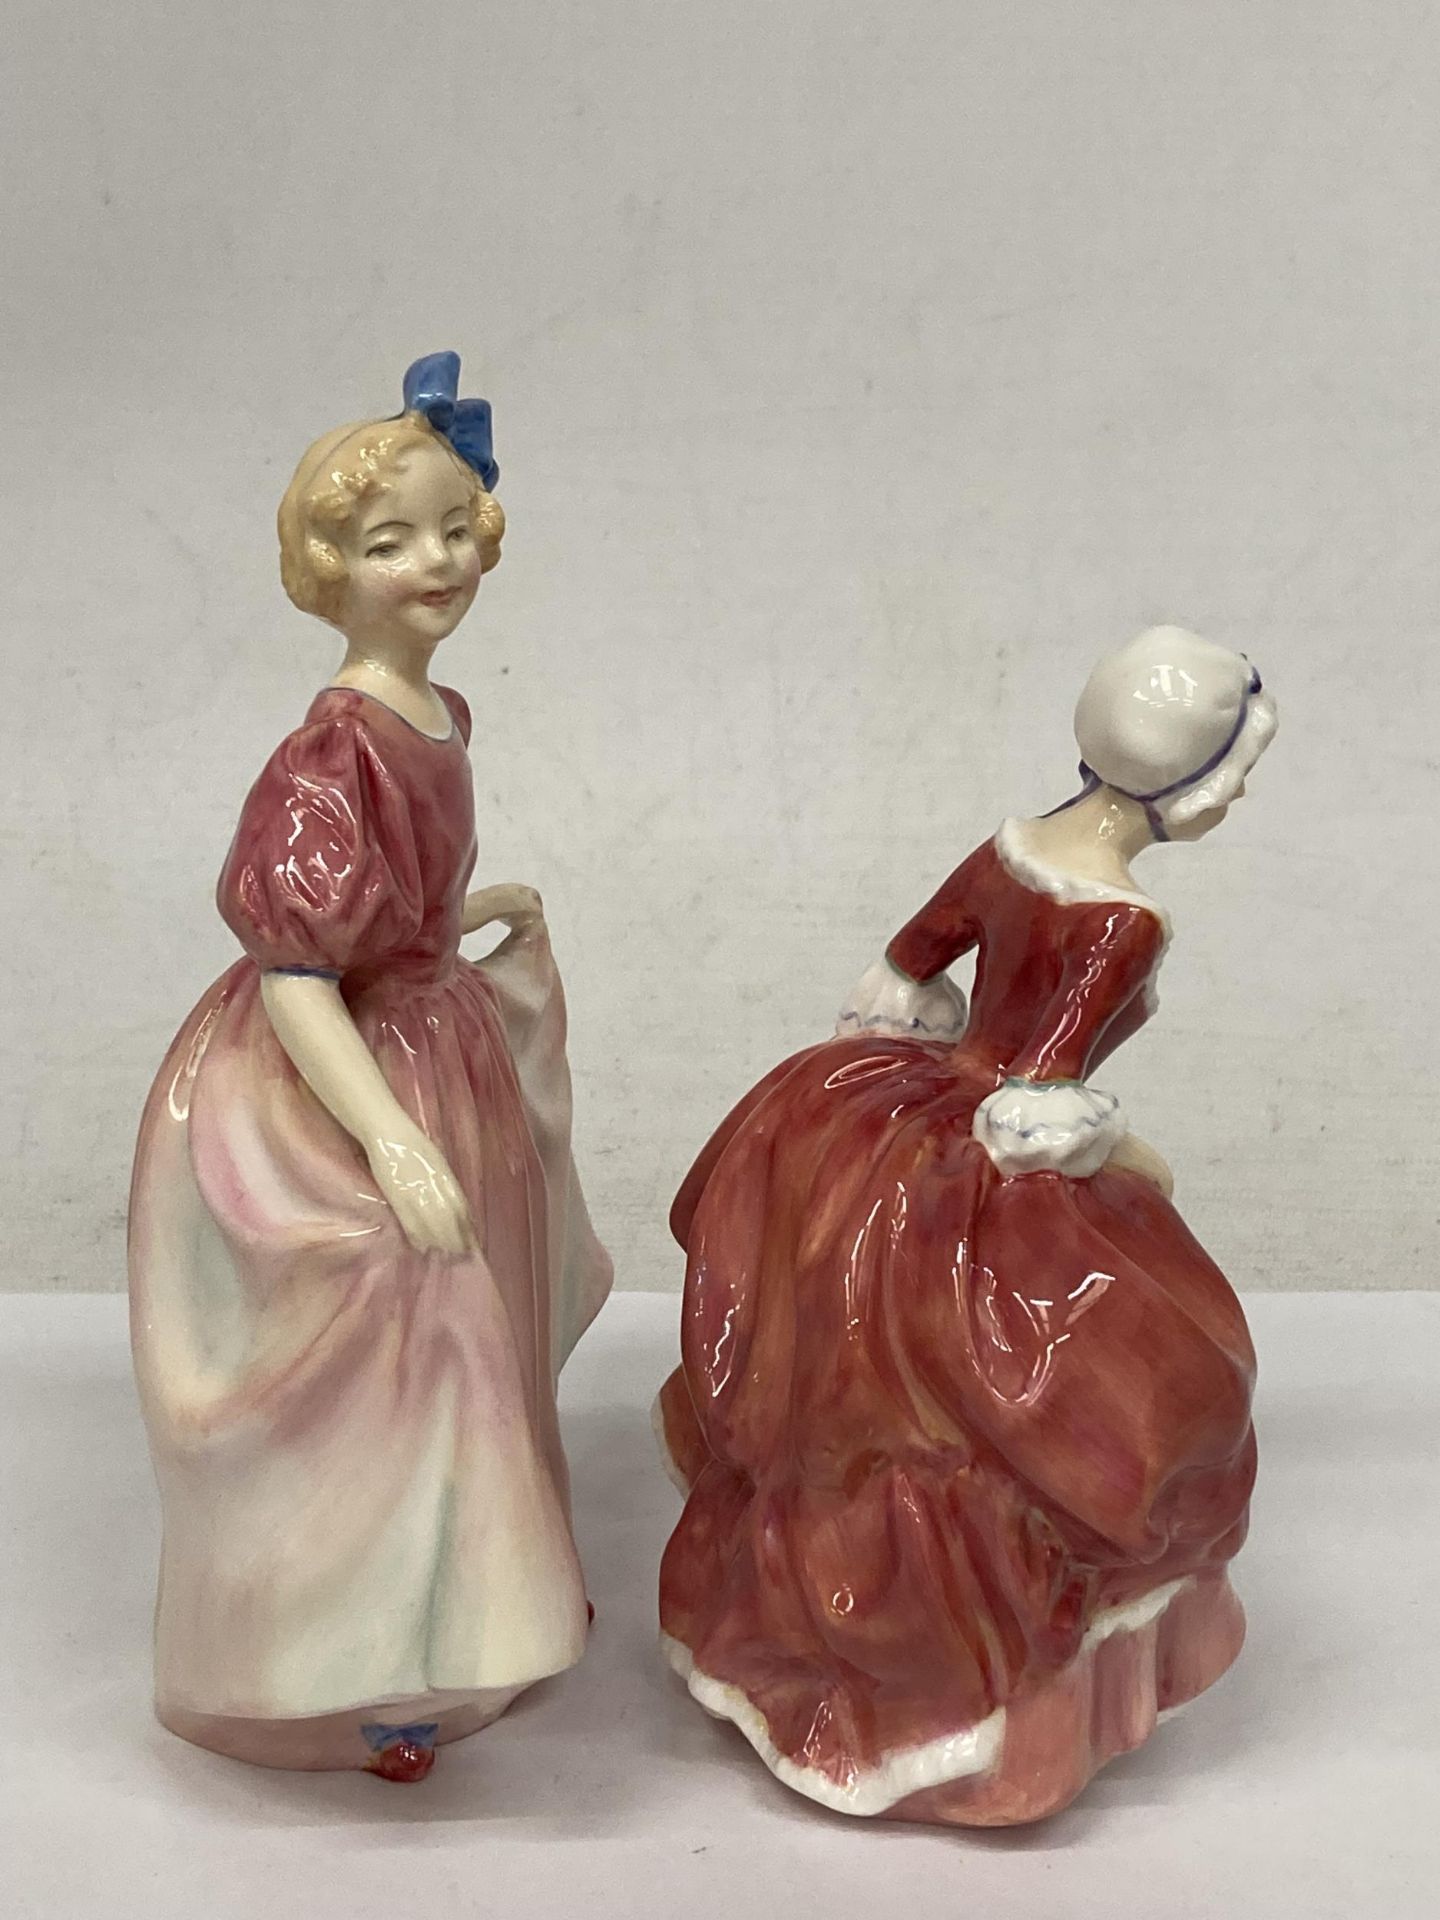 TWO ROYAL DOULTON FIGURINES "GOODY TWO SHOES" HN2037 AND "SWEETING" HN 1935 - Image 2 of 4